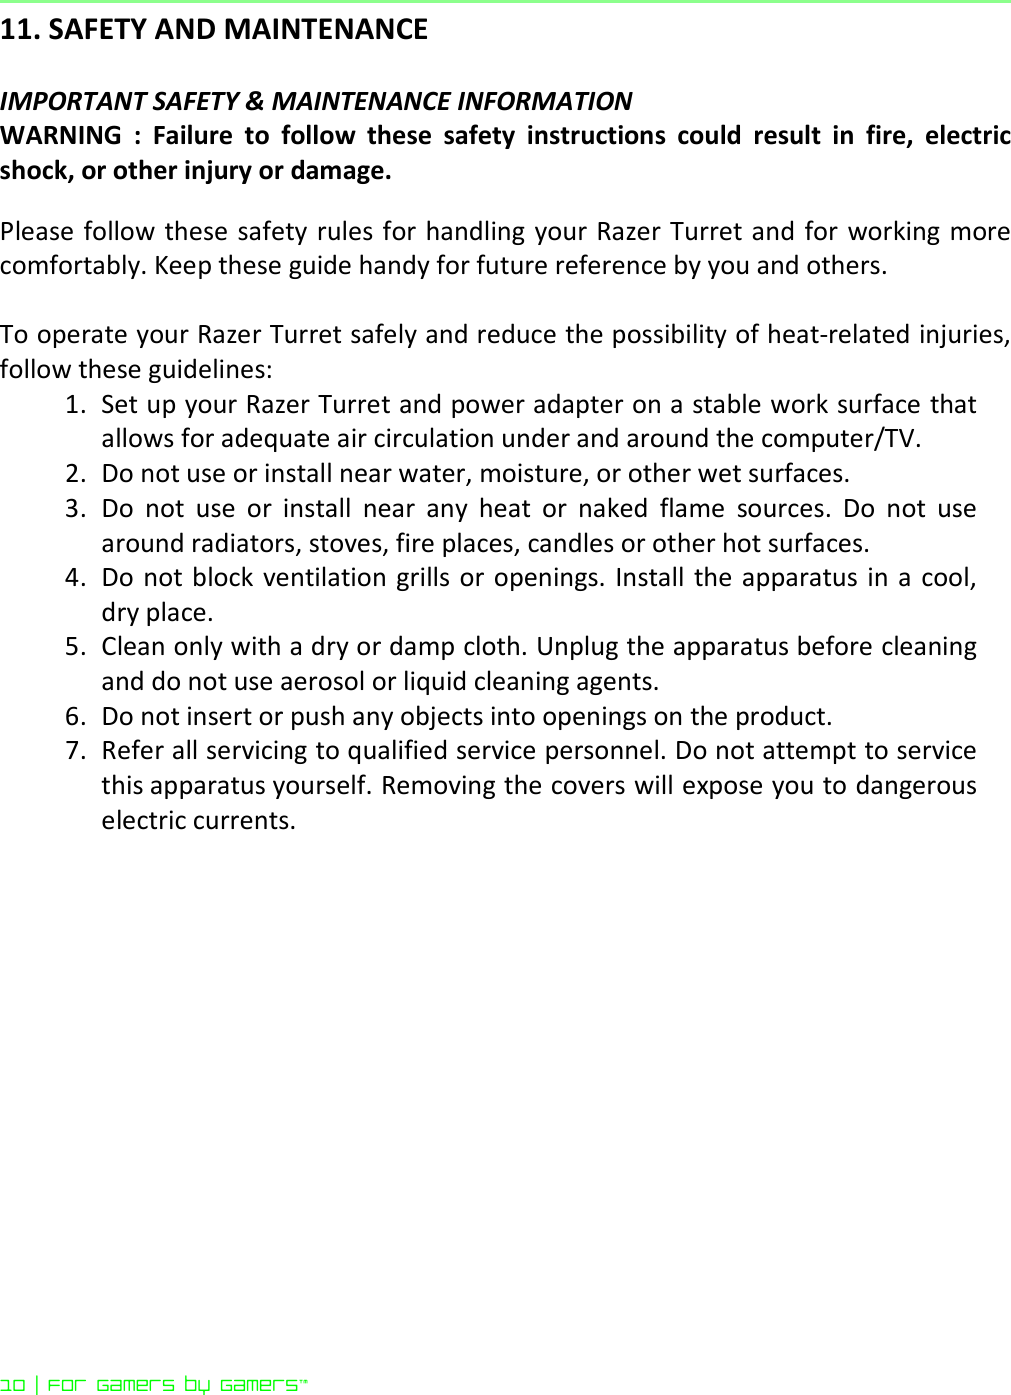 10 | For gamers by gamers™  11. SAFETY AND MAINTENANCE  IMPORTANT SAFETY &amp; MAINTENANCE INFORMATION WARNING  :  Failure  to  follow  these  safety  instructions  could  result  in  fire,  electric shock, or other injury or damage.  Please follow these safety rules for handling your Razer Turret and  for working more comfortably. Keep these guide handy for future reference by you and others.  To operate your Razer Turret safely and reduce the possibility of heat-related injuries, follow these guidelines: 1. Set up your Razer Turret and power adapter on a stable work surface that allows for adequate air circulation under and around the computer/TV.  2. Do not use or install near water, moisture, or other wet surfaces. 3. Do  not  use  or  install  near  any  heat  or  naked  flame  sources.  Do  not  use around radiators, stoves, fire places, candles or other hot surfaces. 4. Do  not block  ventilation grills or openings. Install  the apparatus in a cool, dry place. 5. Clean only with a dry or damp cloth. Unplug the apparatus before cleaning and do not use aerosol or liquid cleaning agents. 6. Do not insert or push any objects into openings on the product. 7. Refer all servicing to qualified service personnel. Do not attempt to service this apparatus yourself. Removing the covers will expose you to dangerous electric currents.  